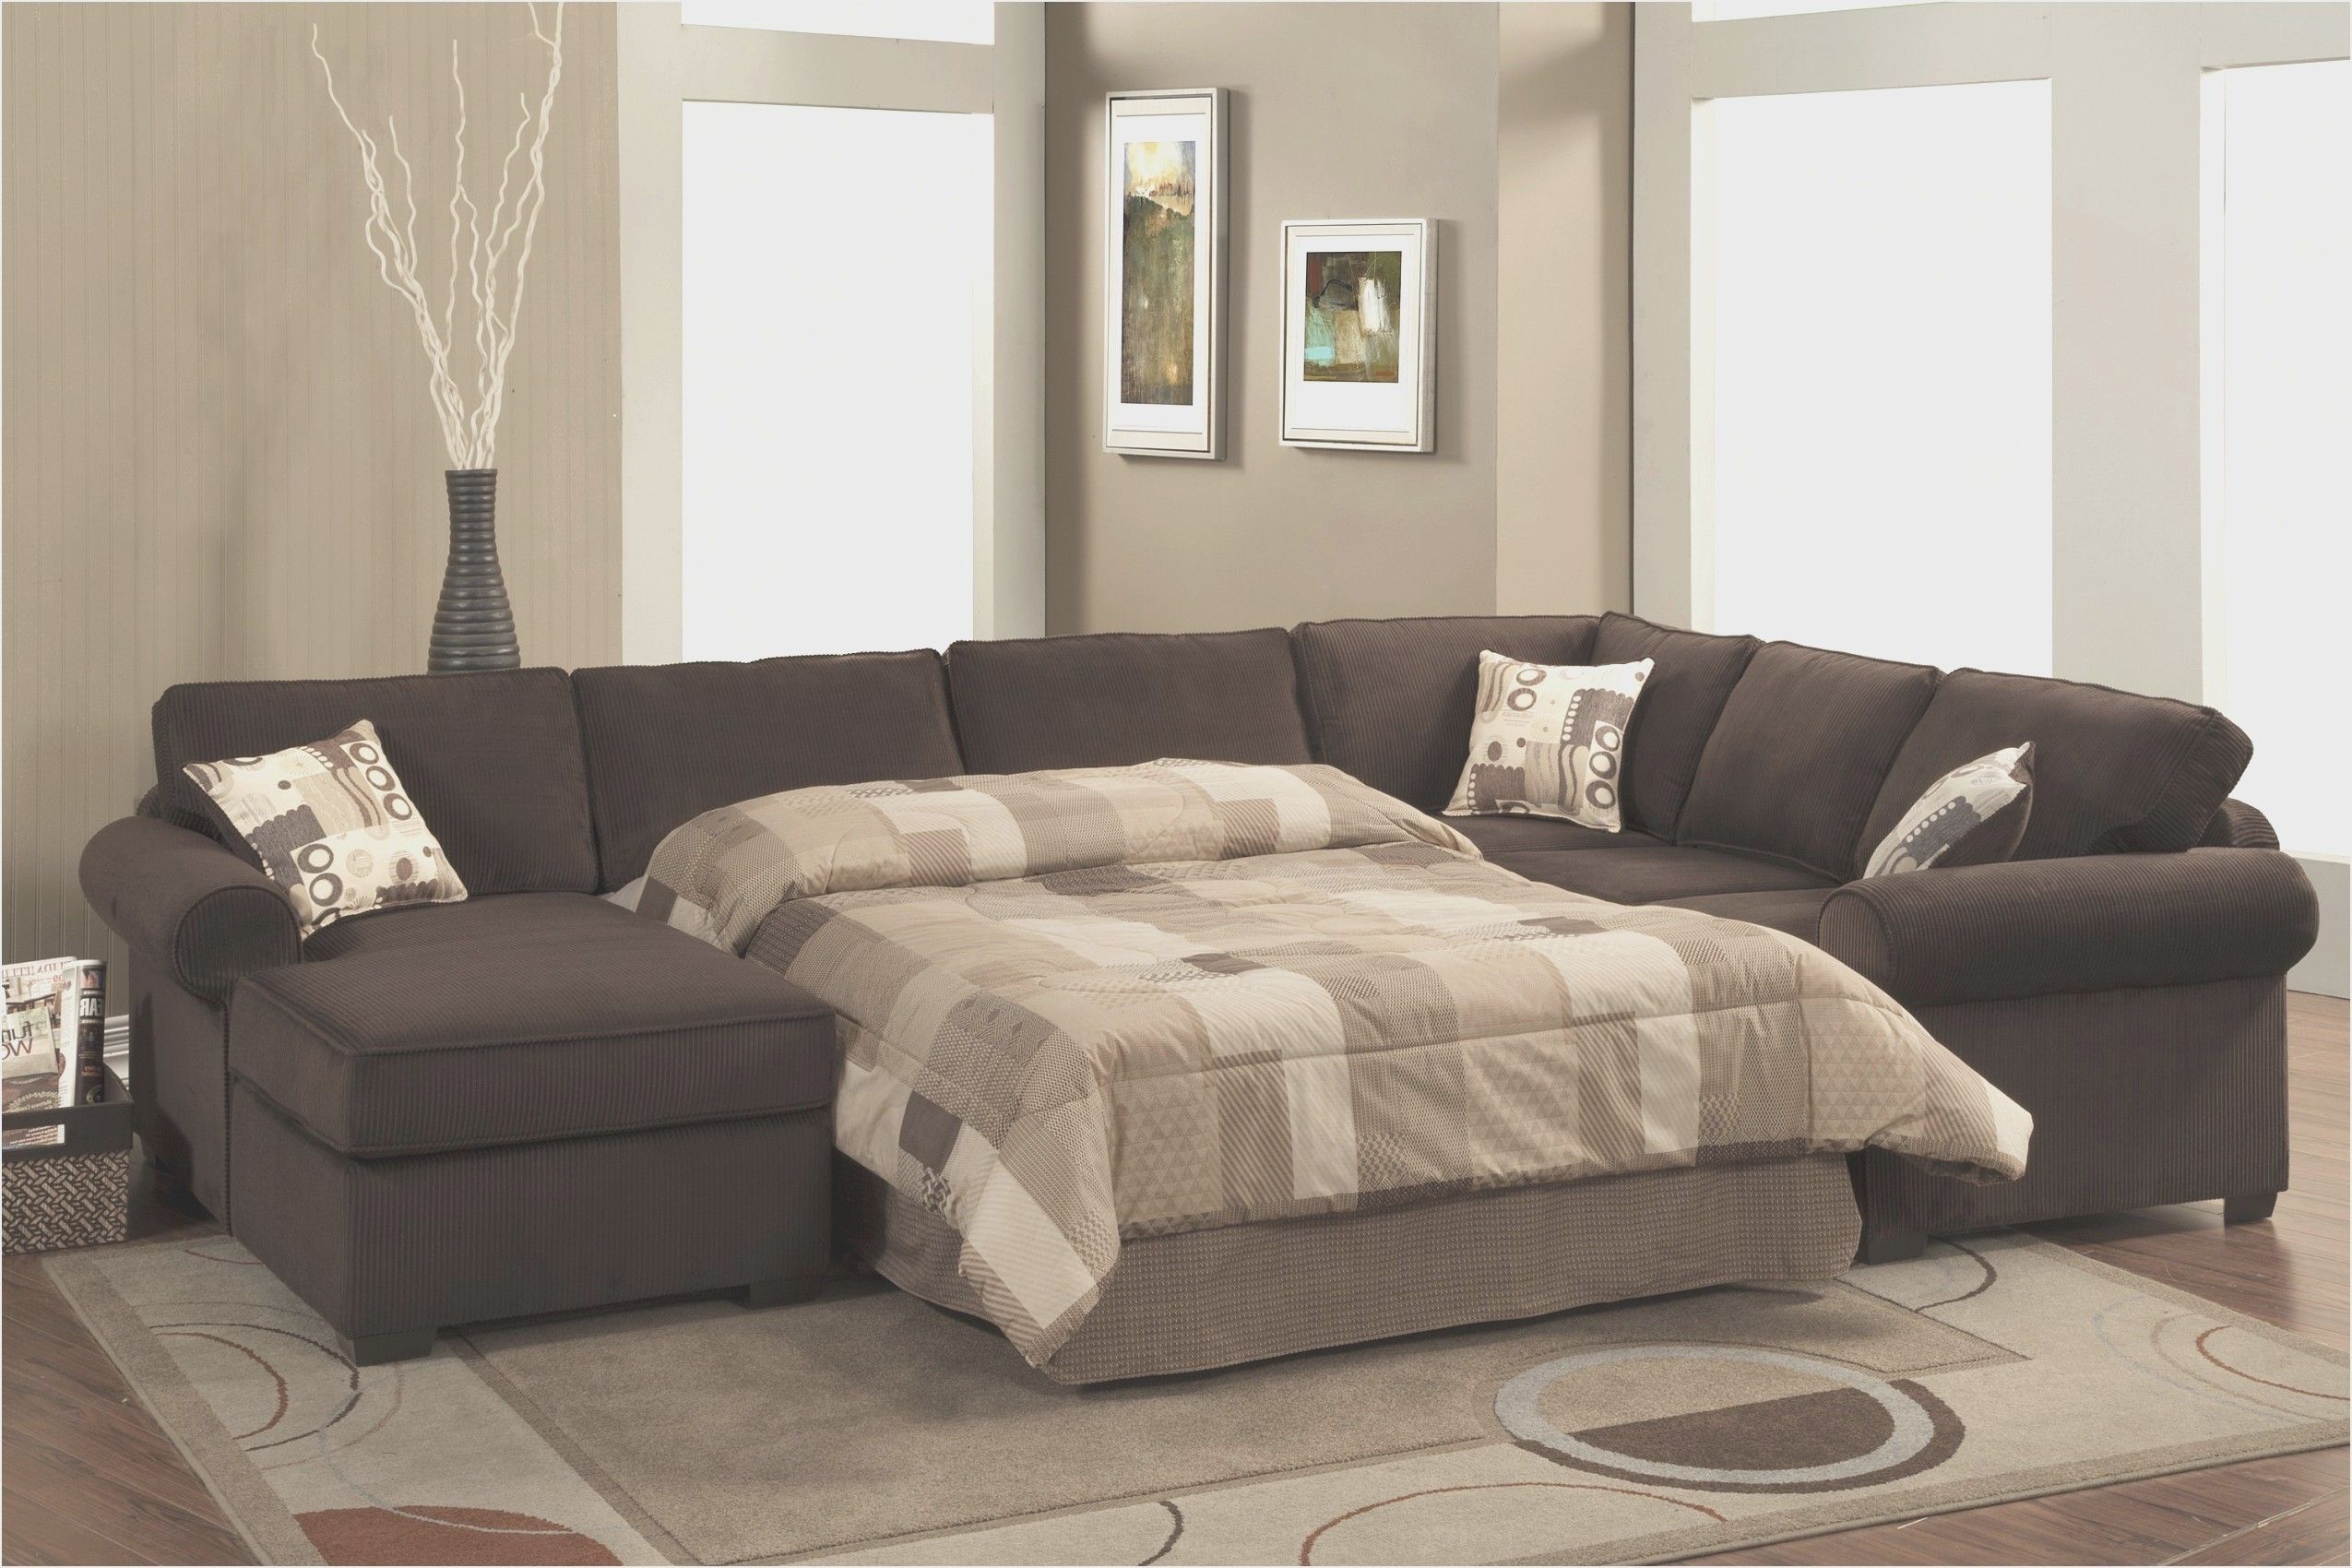 Sofas For Bedroom | Home Decor & Furnitures With Bedroom Sofas (View 4 of 10)